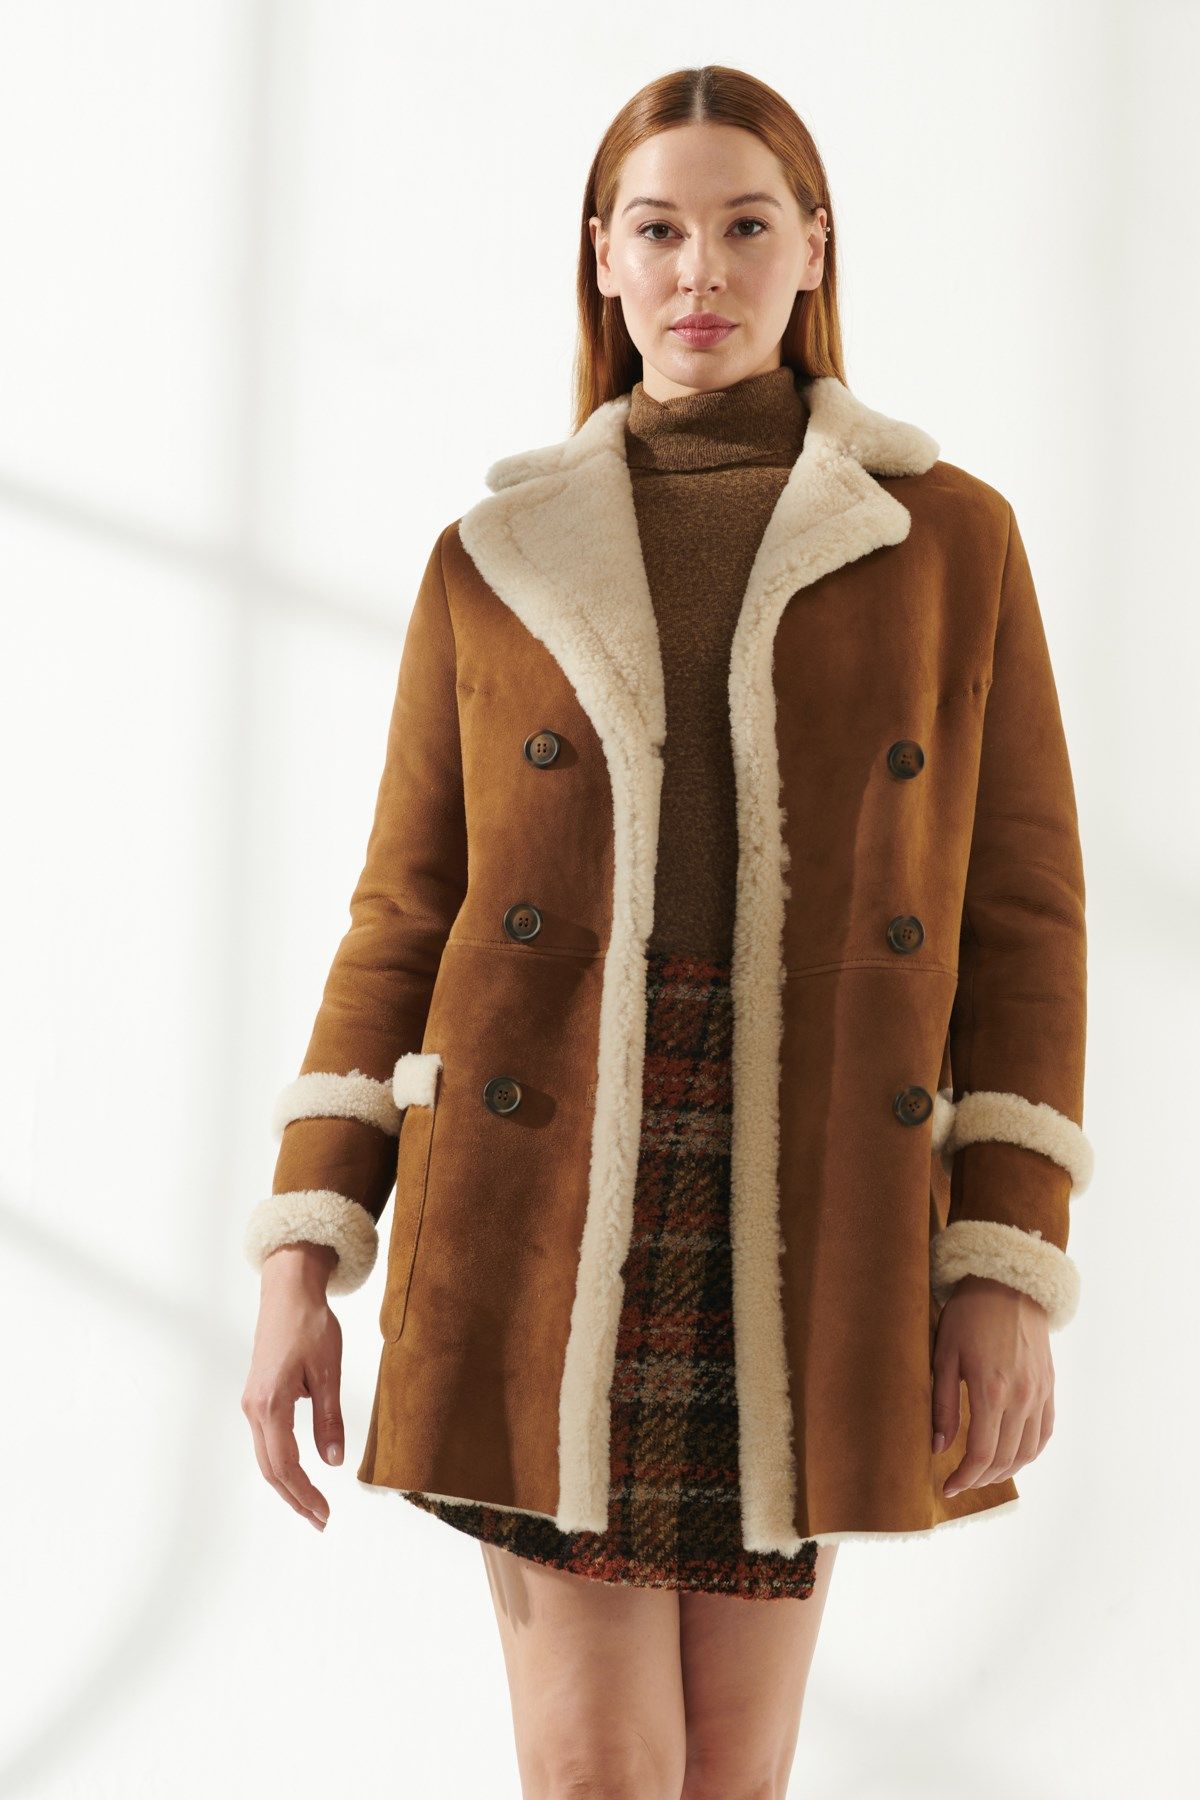 Stay Warm and Stylish in Chic Shearling
Coats: Fashionable Outerwear for Every Occasion